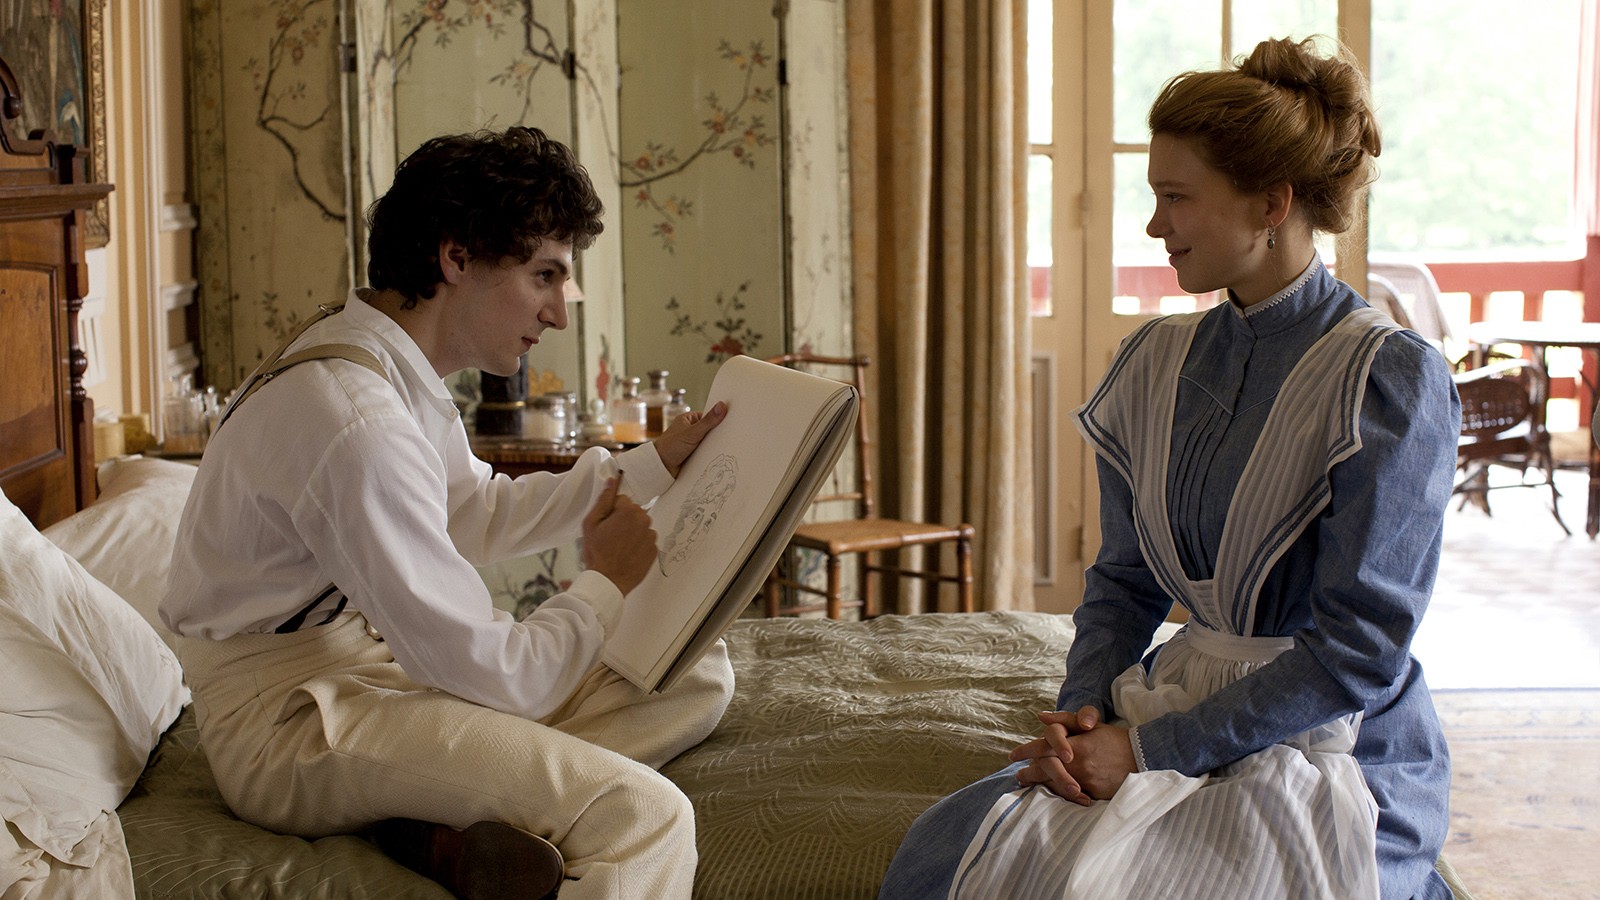 Vincent Lacoste stars as Georges and Lea Seydoux stars as Celestine in Cohen Media Group's Diary of a Chambermaid (2016)